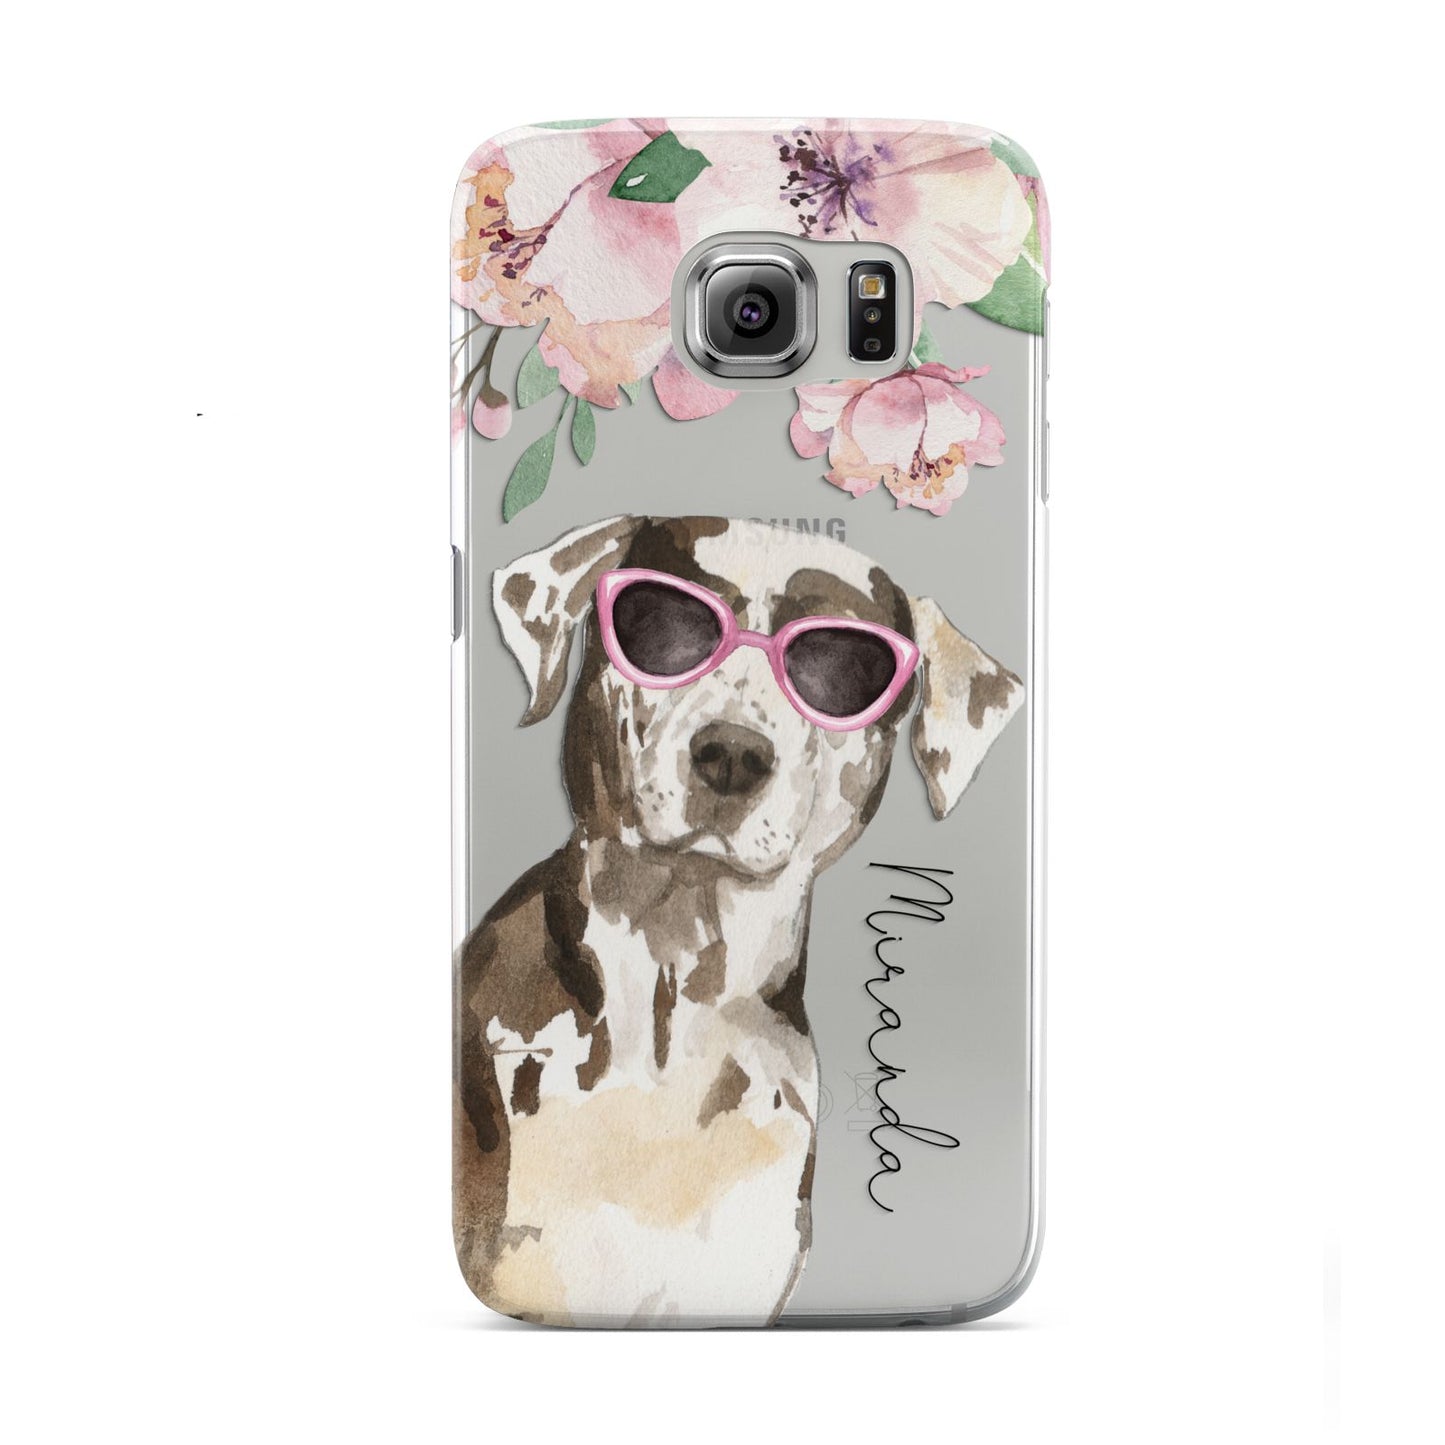 Personalised Catahoula Leopard Dog Samsung Galaxy S6 Case